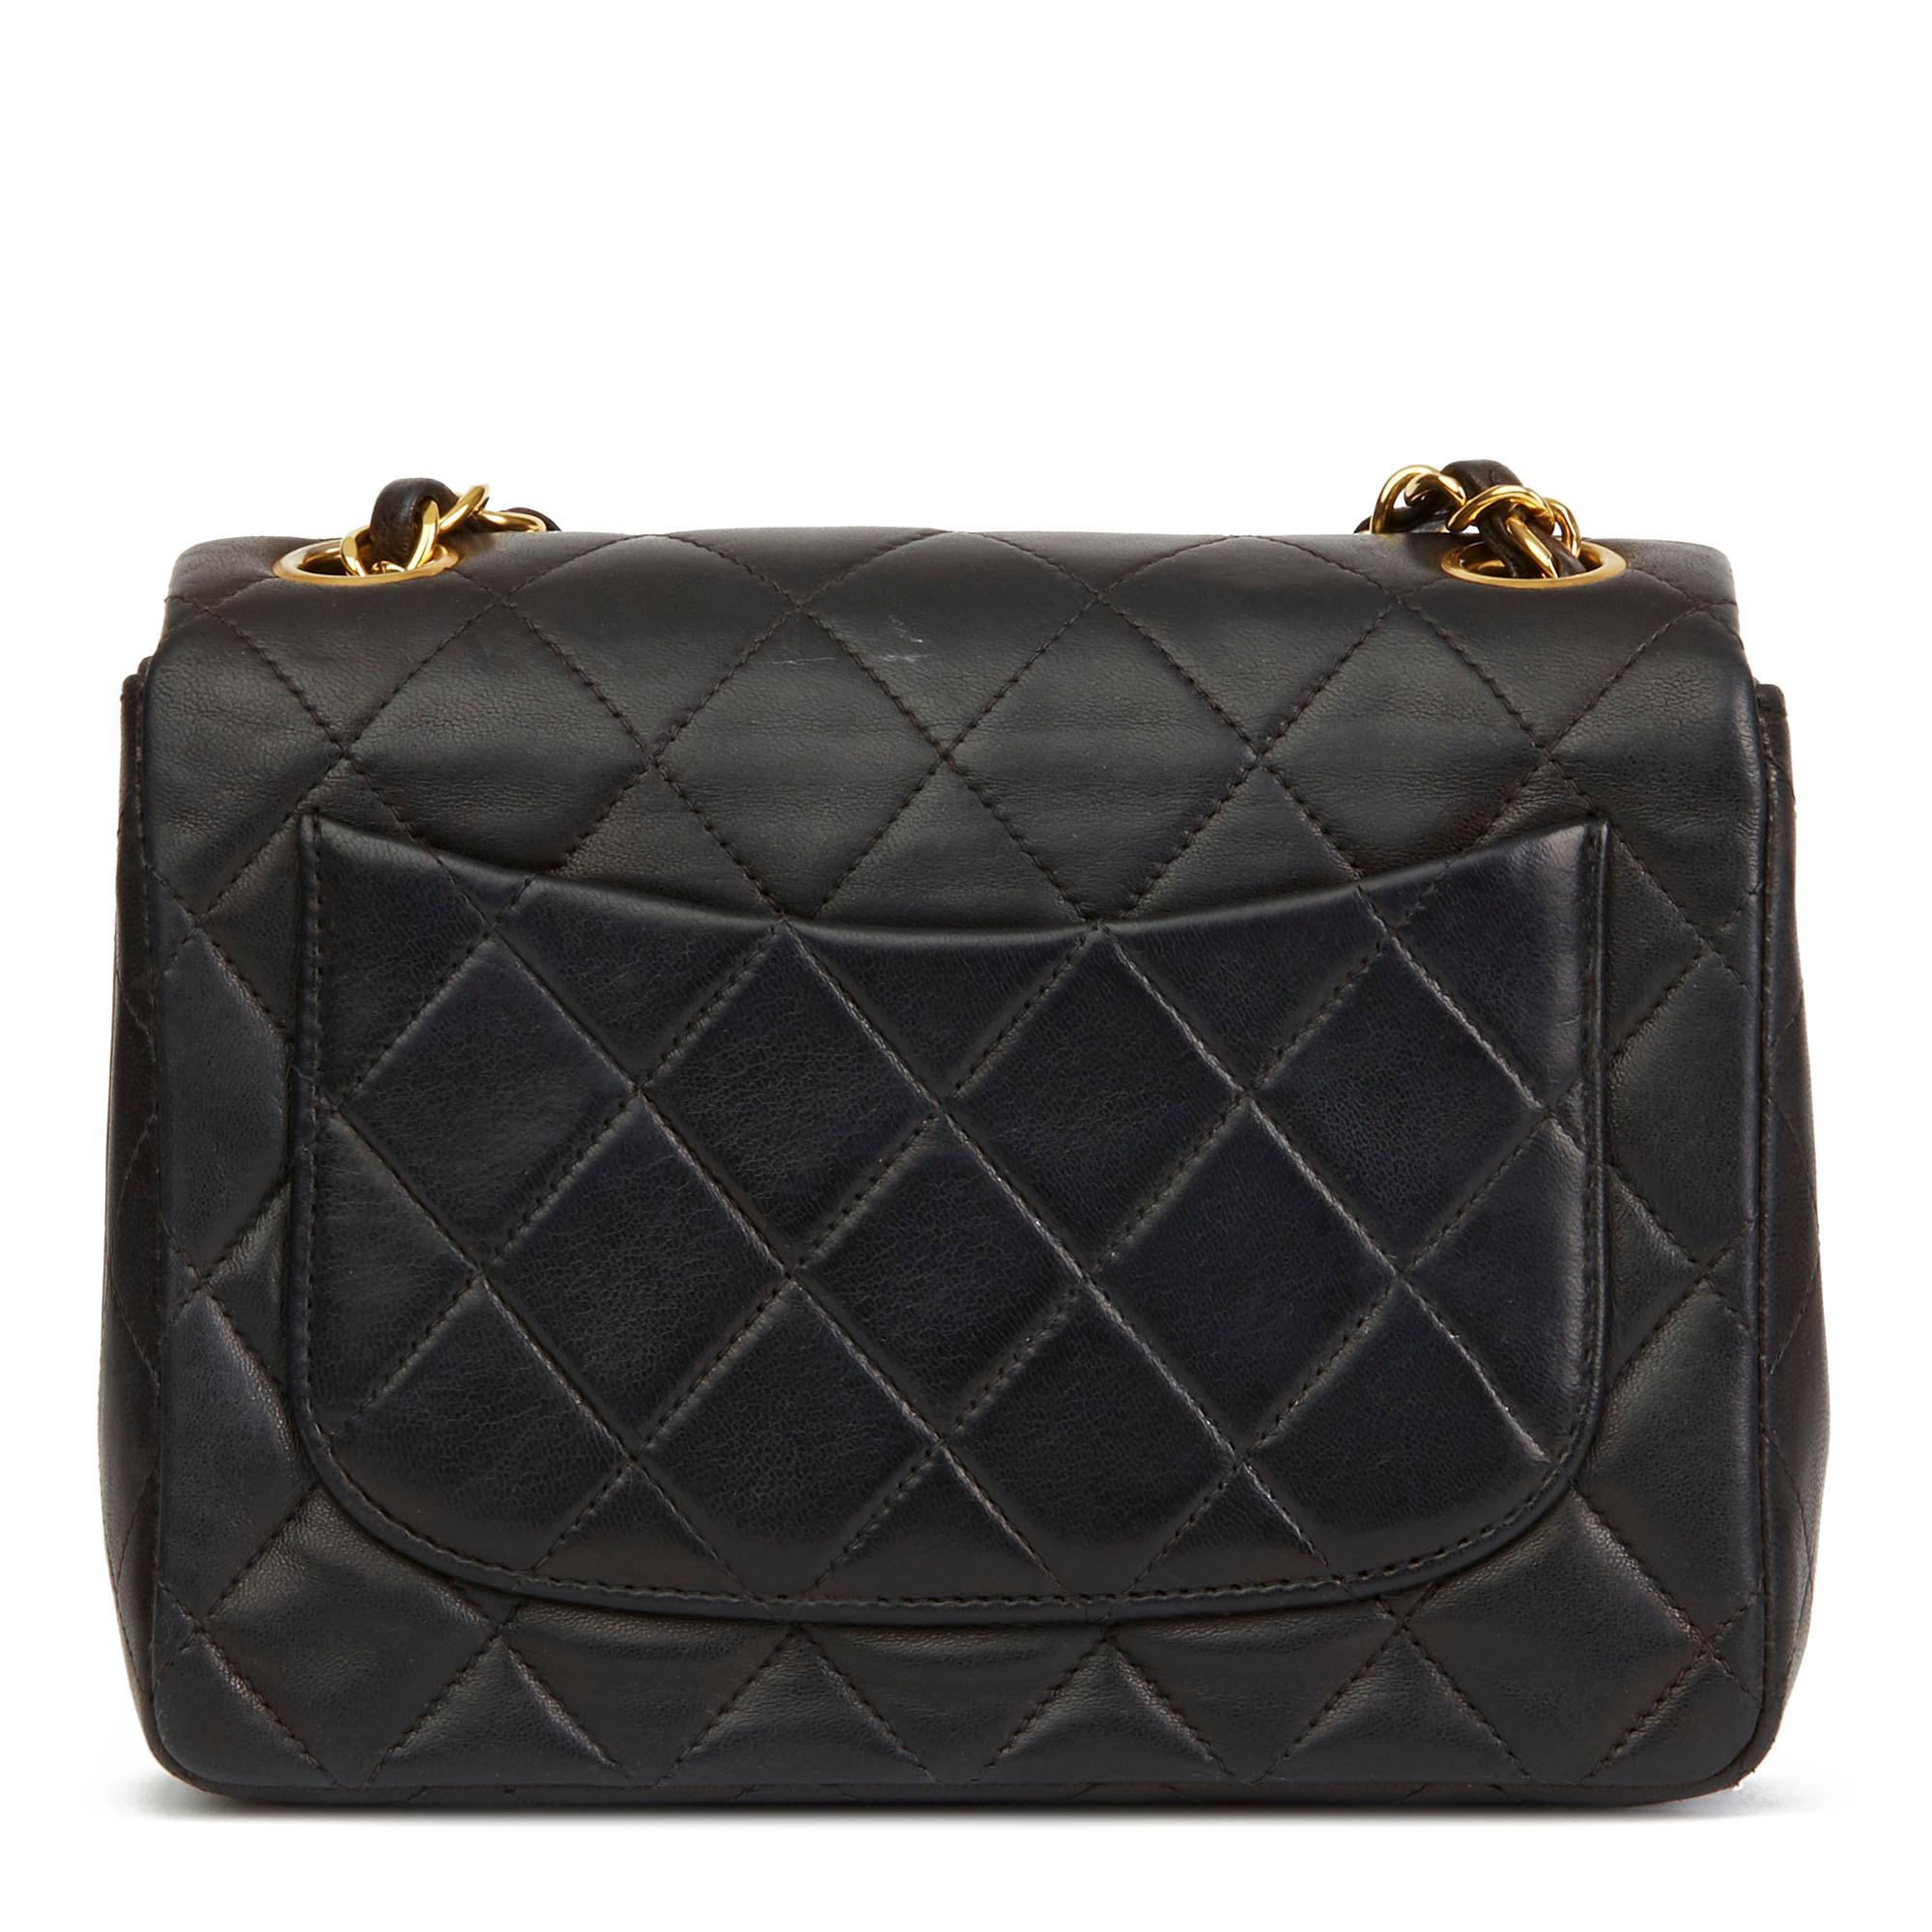 Women's 1992 Chanel Black Quilted Lambskin Vintage Mini Flap Bag